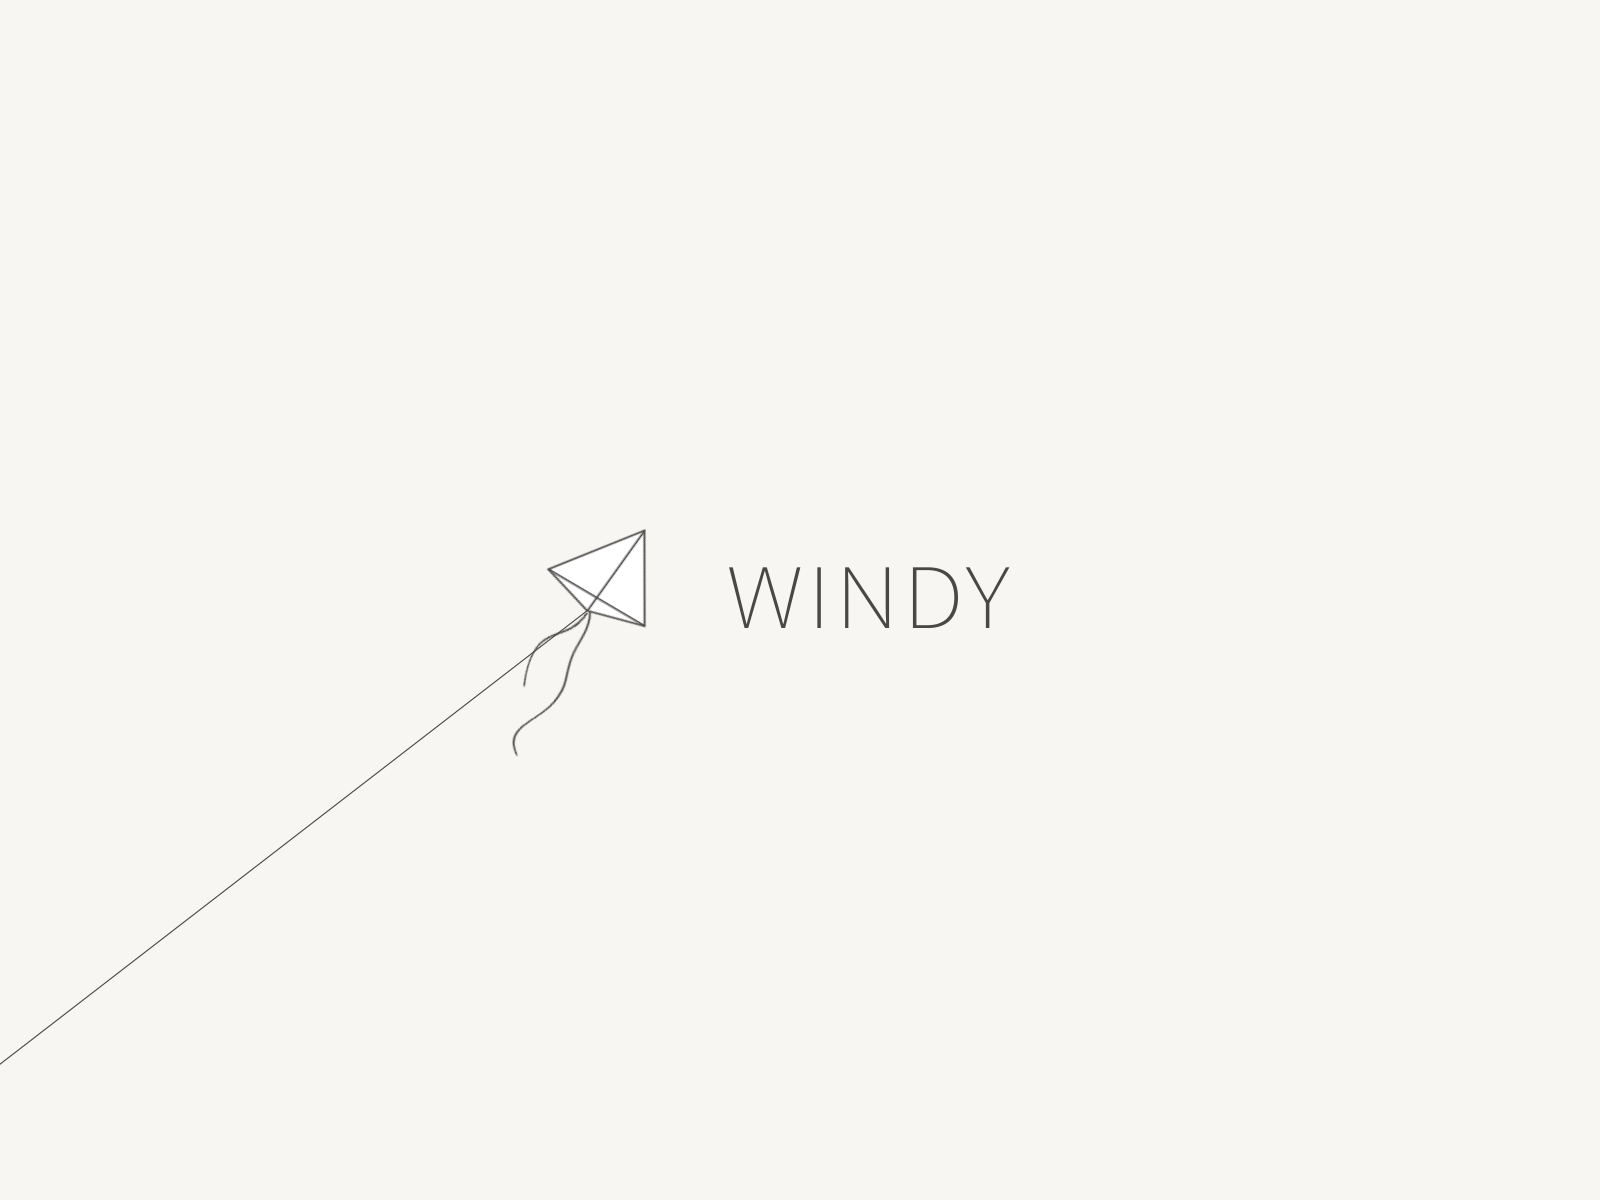 Windy Day animation fly kite